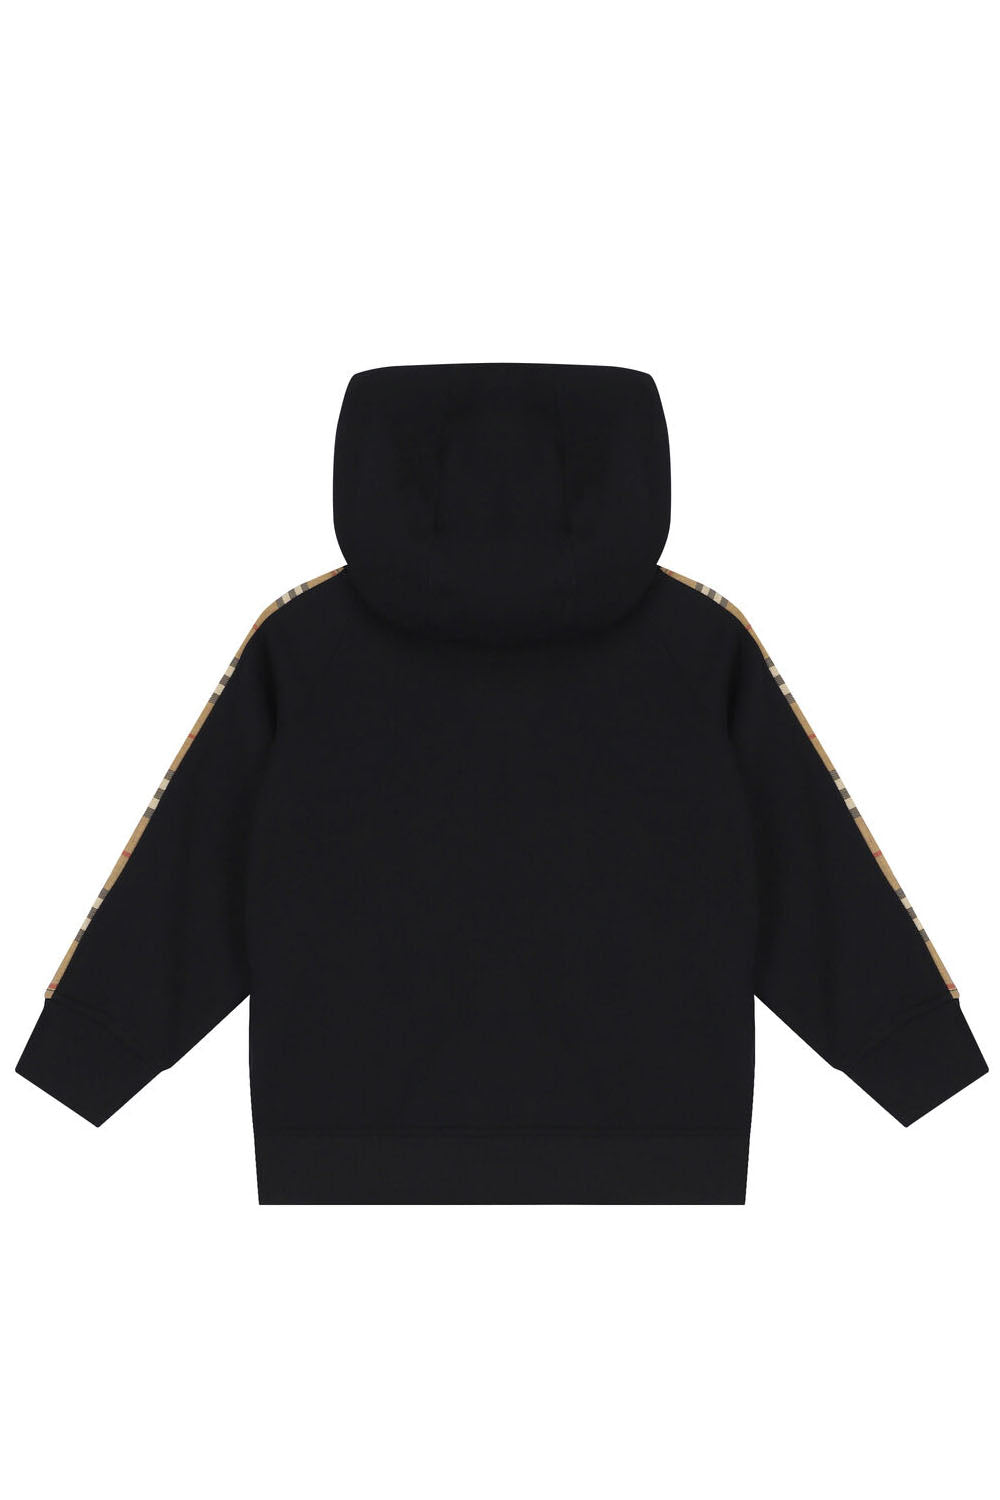 Check Panel Cotton Zip Hoodie for Boys - Maison7